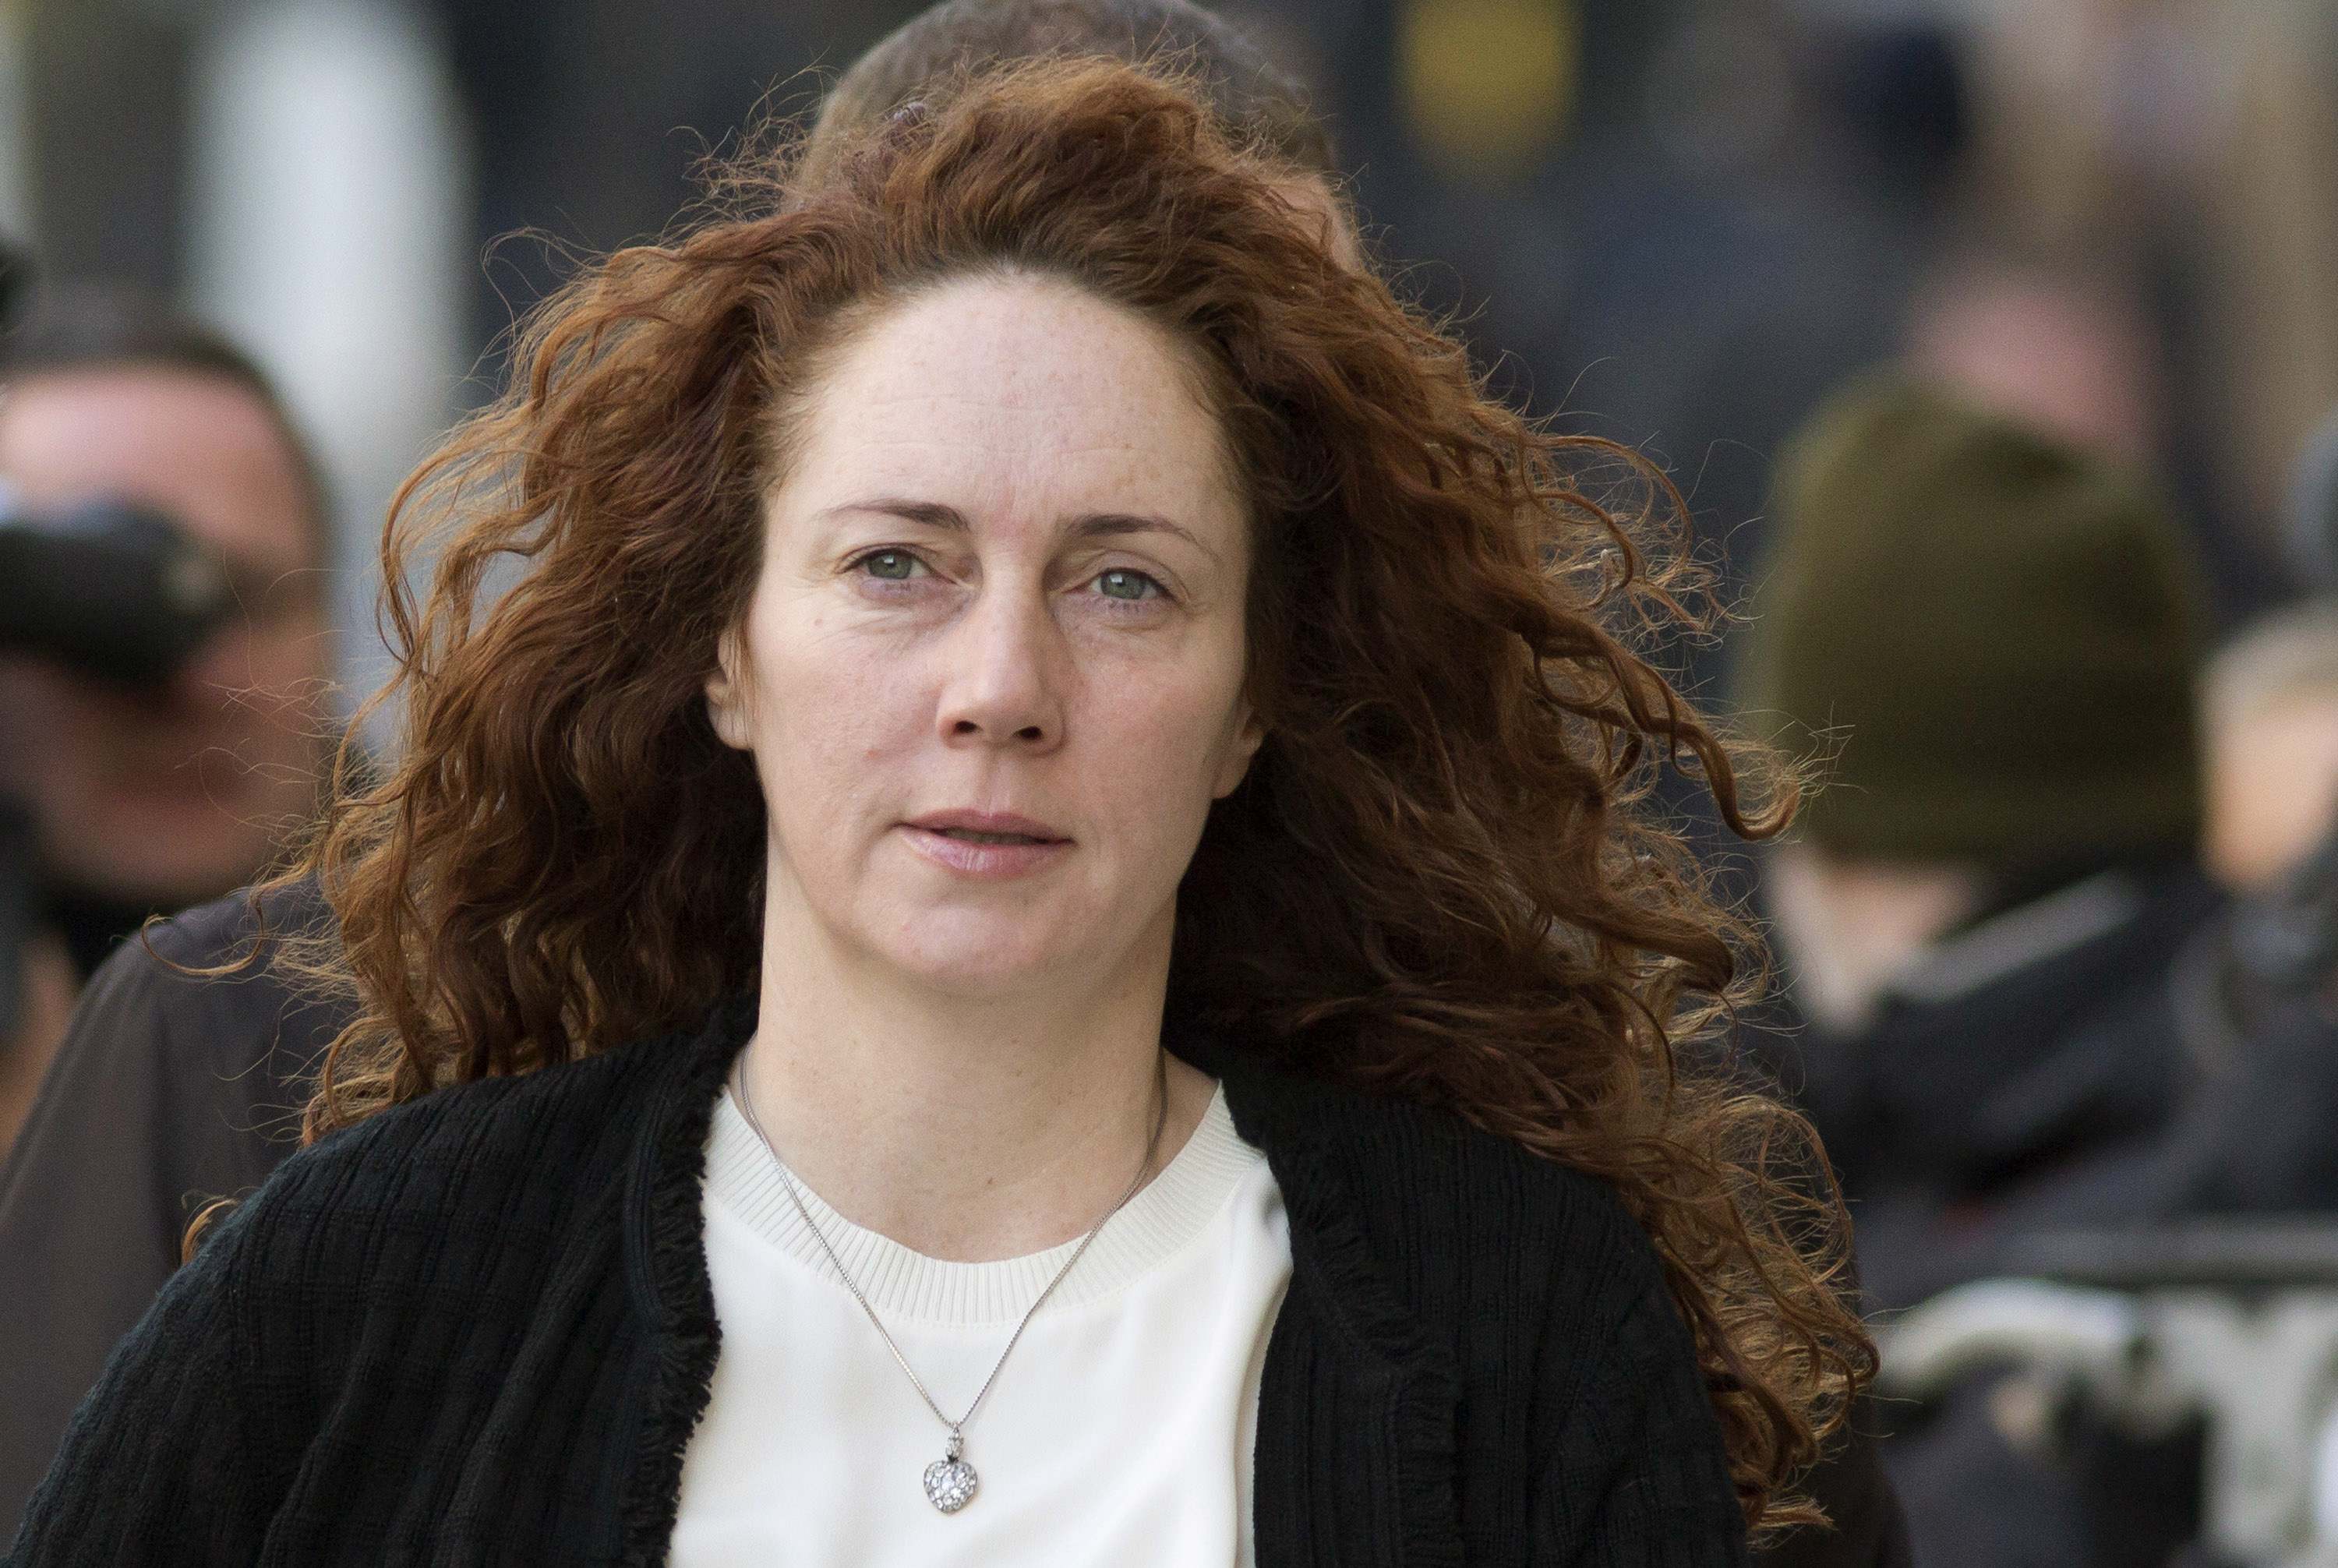 Former News International chief executive Rebekah Brooks arrives at the Old Bailey courthouse in London on Wednesday. Photo: Reuters